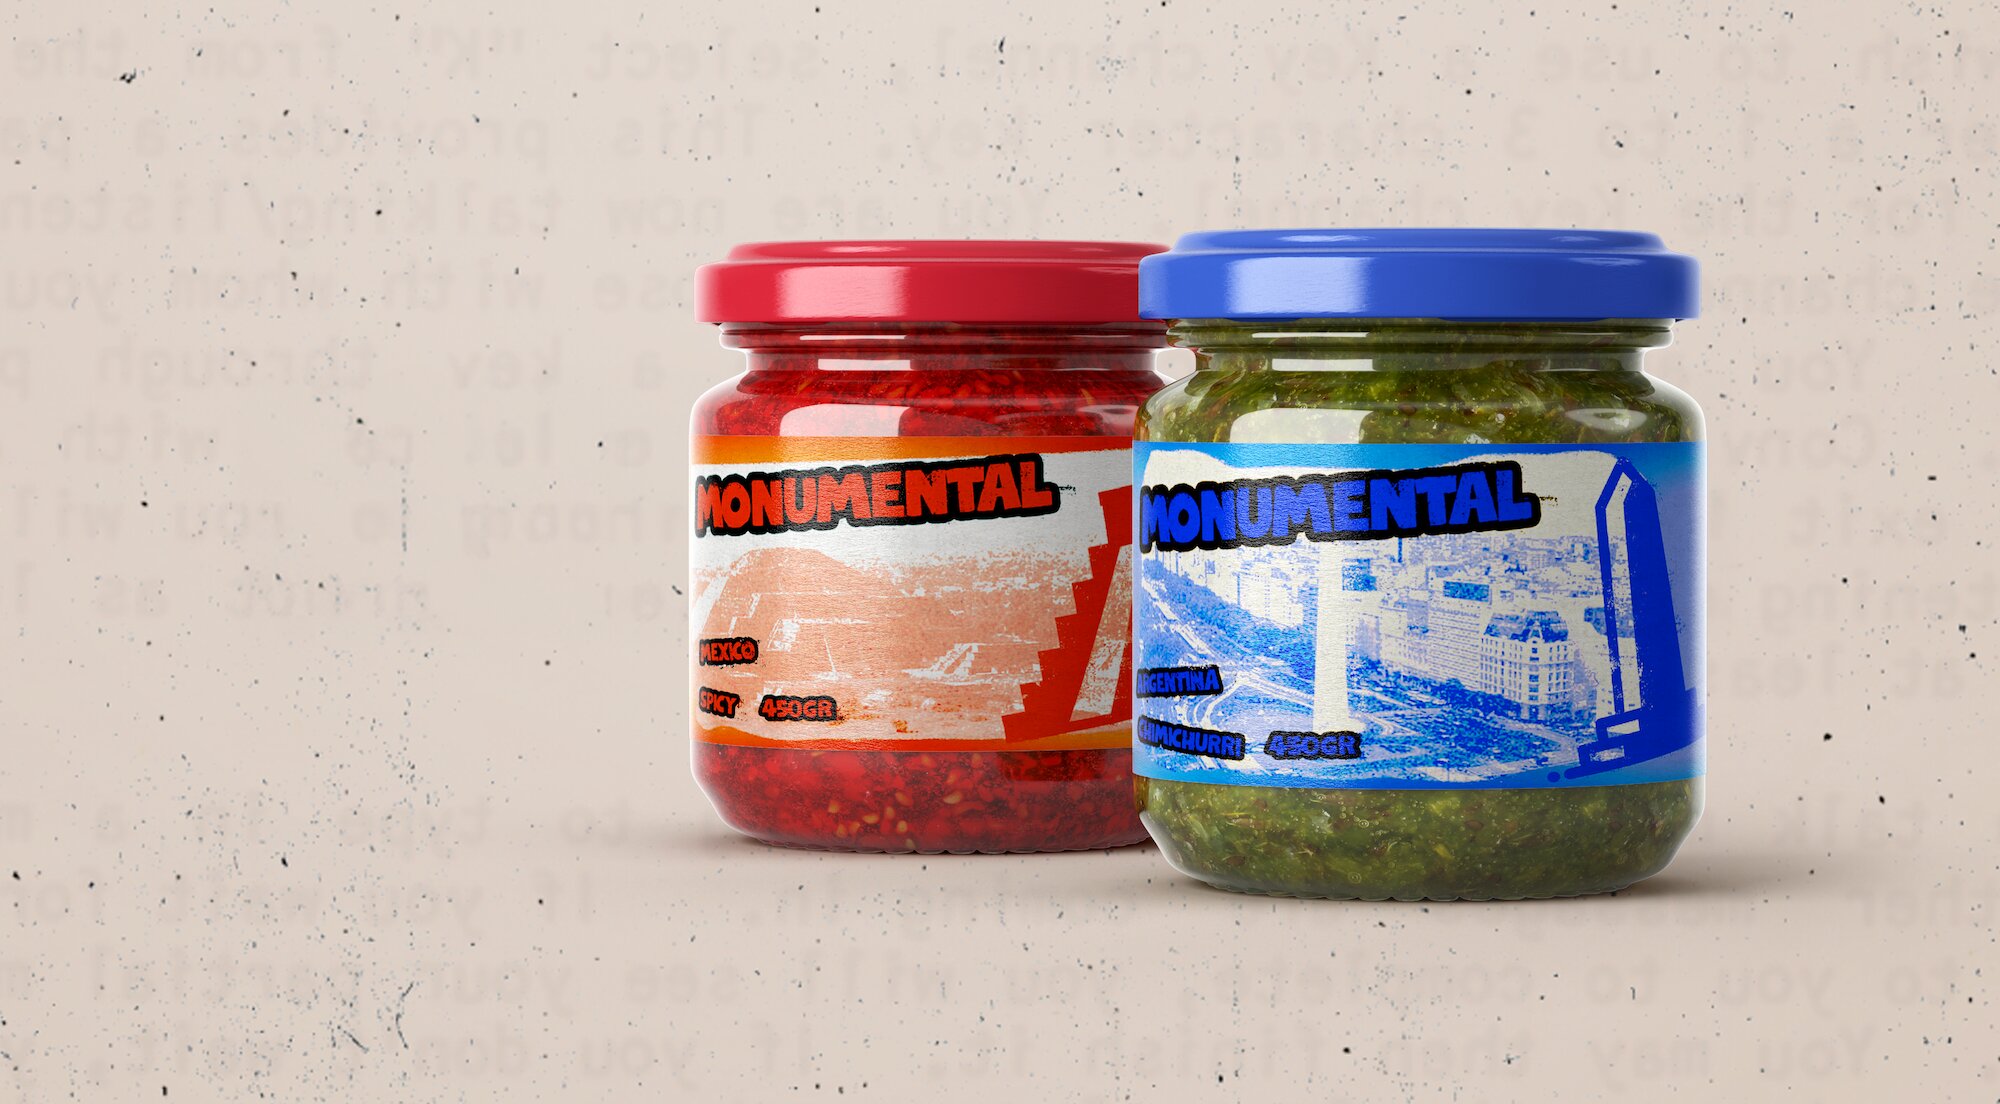 2 jar sauce. Blue and red packaging.